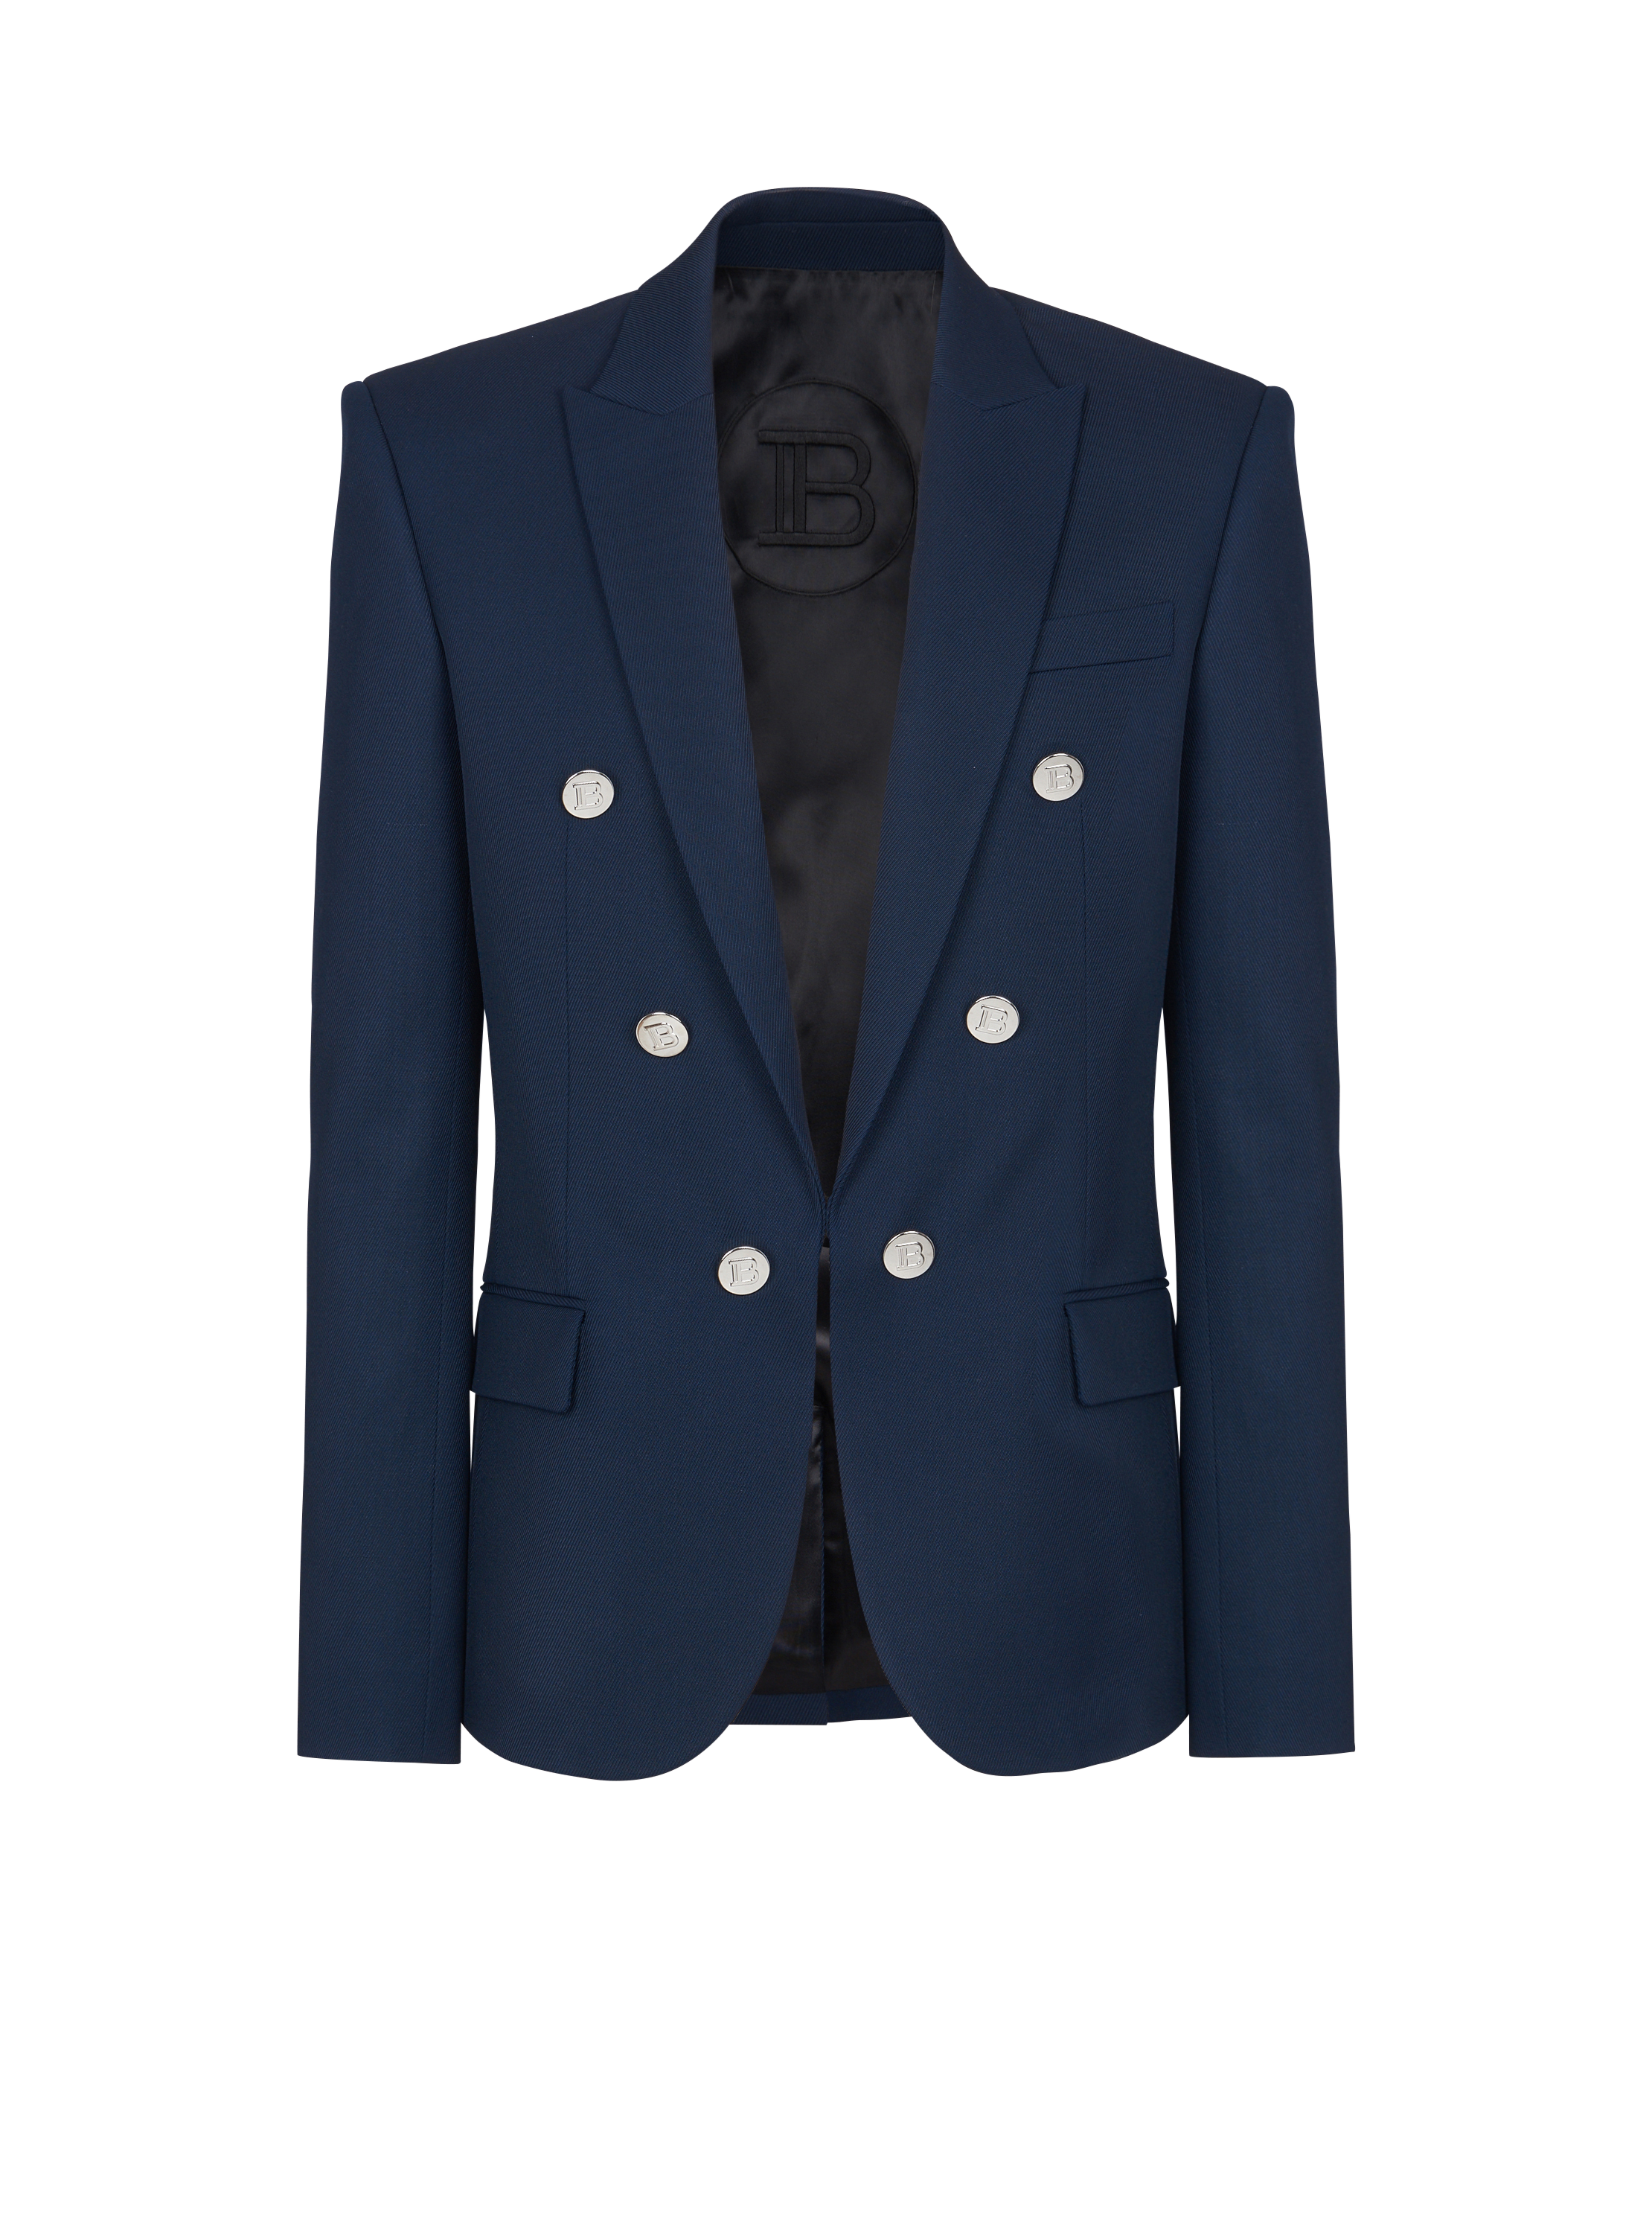 Double breasted blazer, navy, hi-res